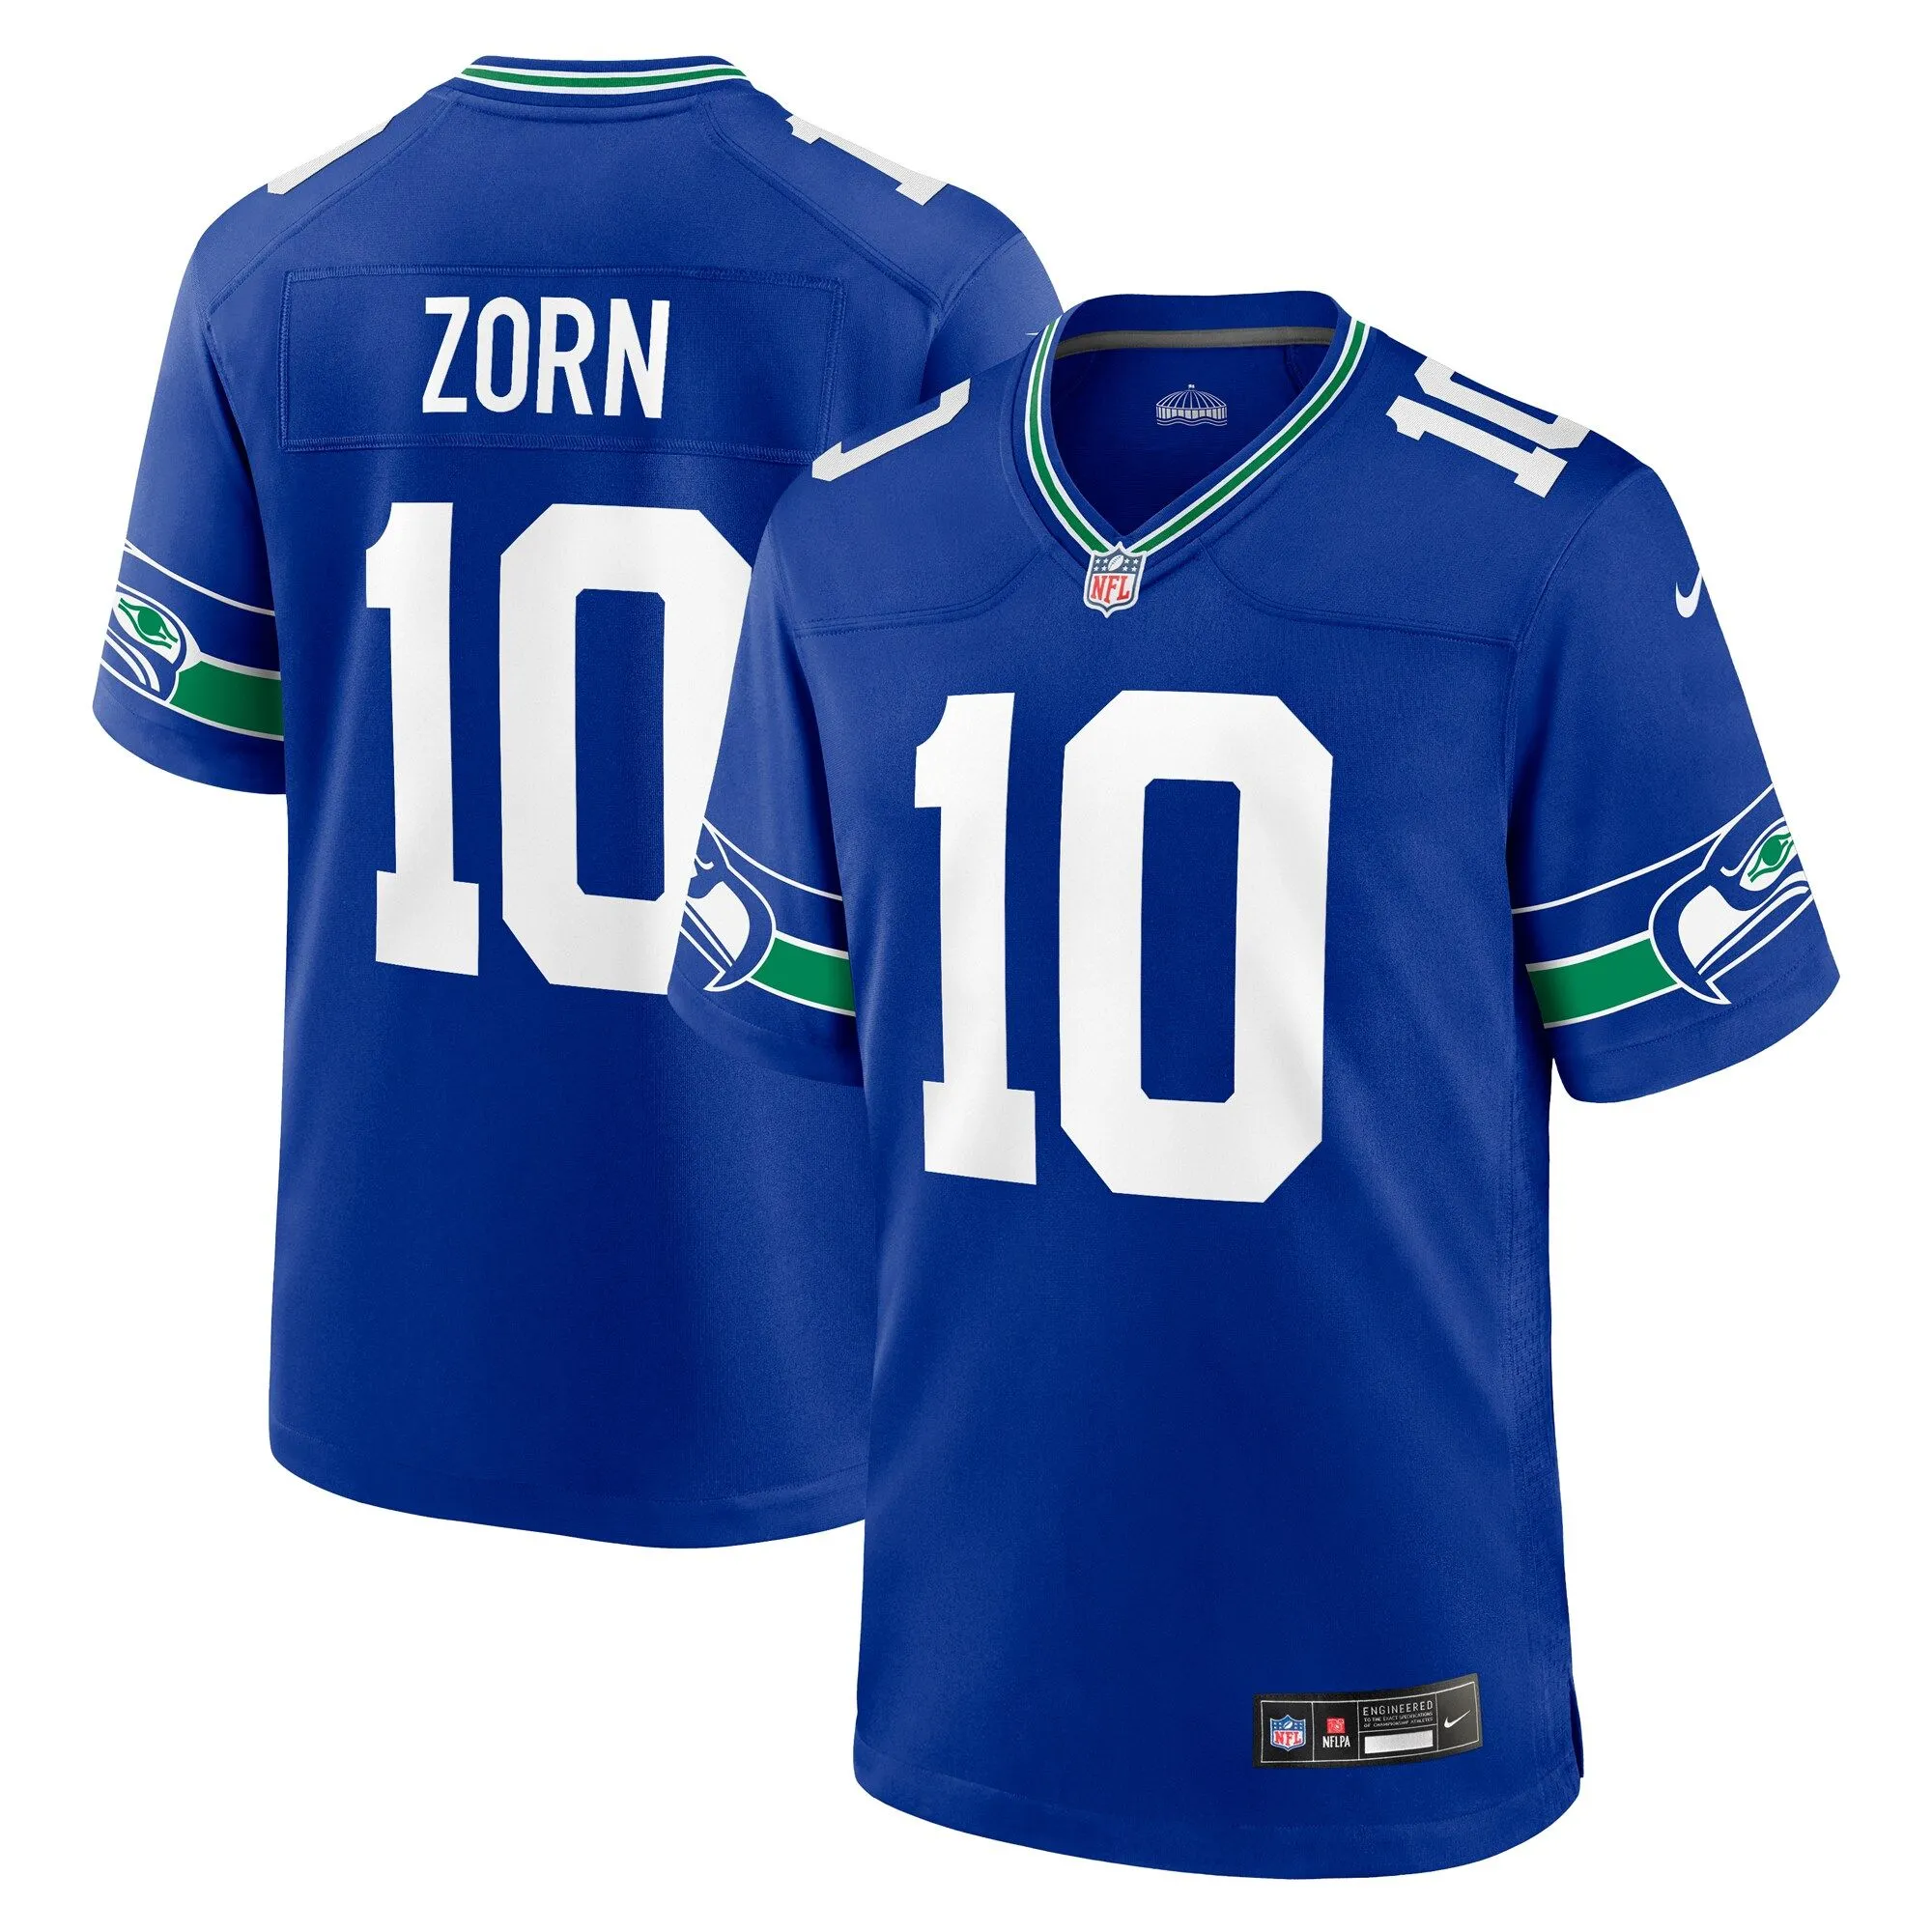 Jim Zorn Seattle Seahawks  Throwback Retired Player Game Jersey - Royal